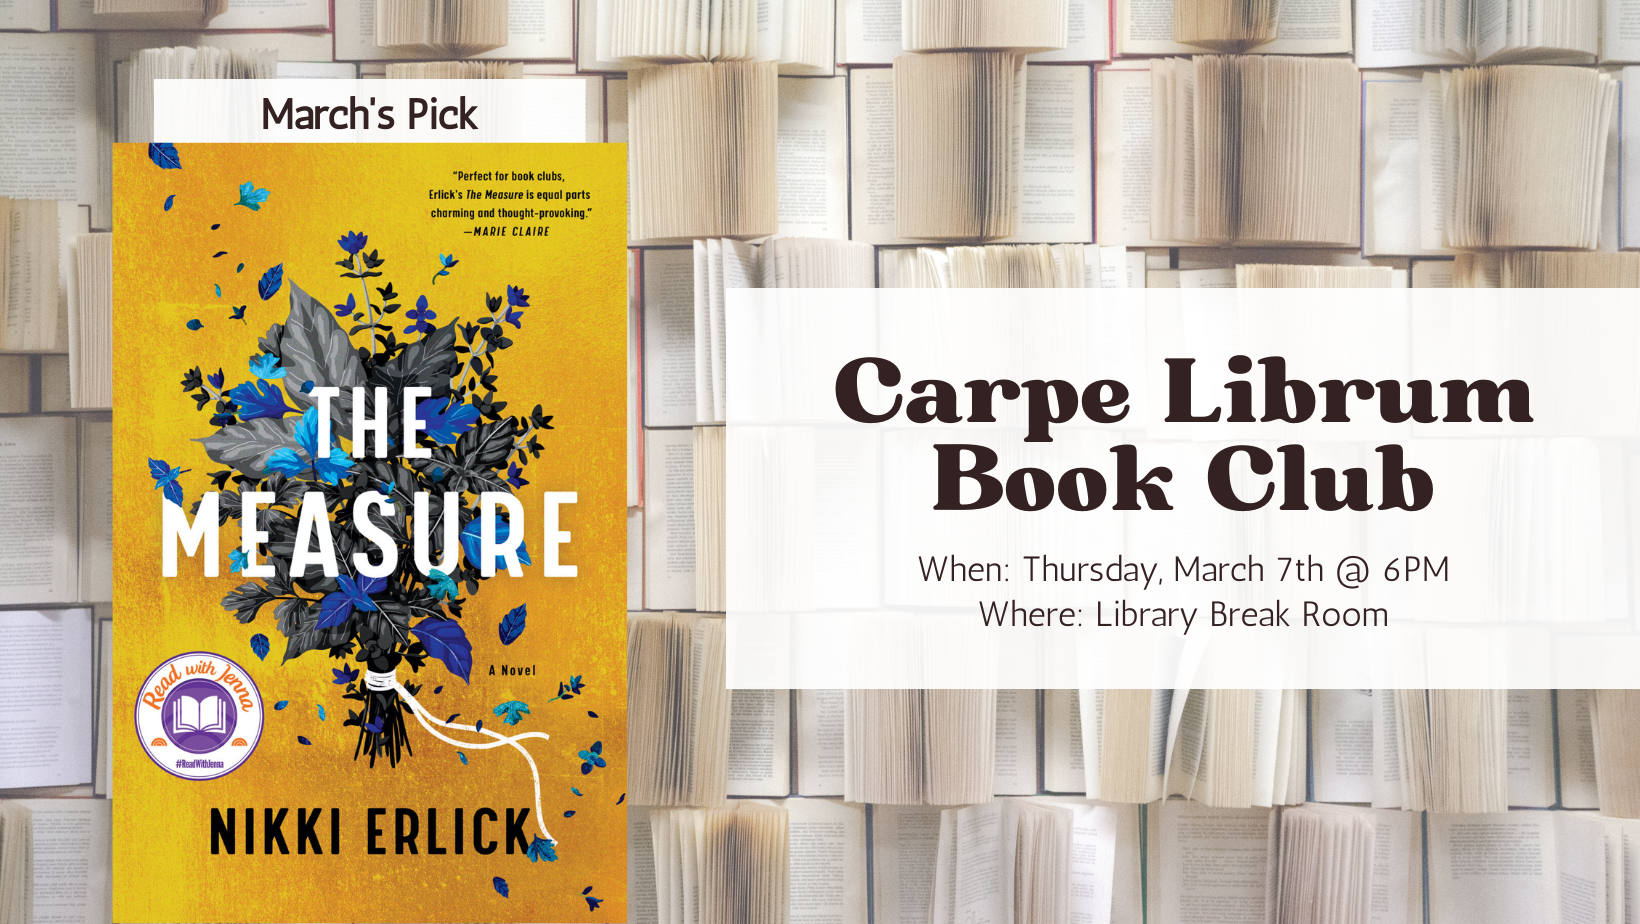 March's book club pick is "The Measure" by Nikki Erlick